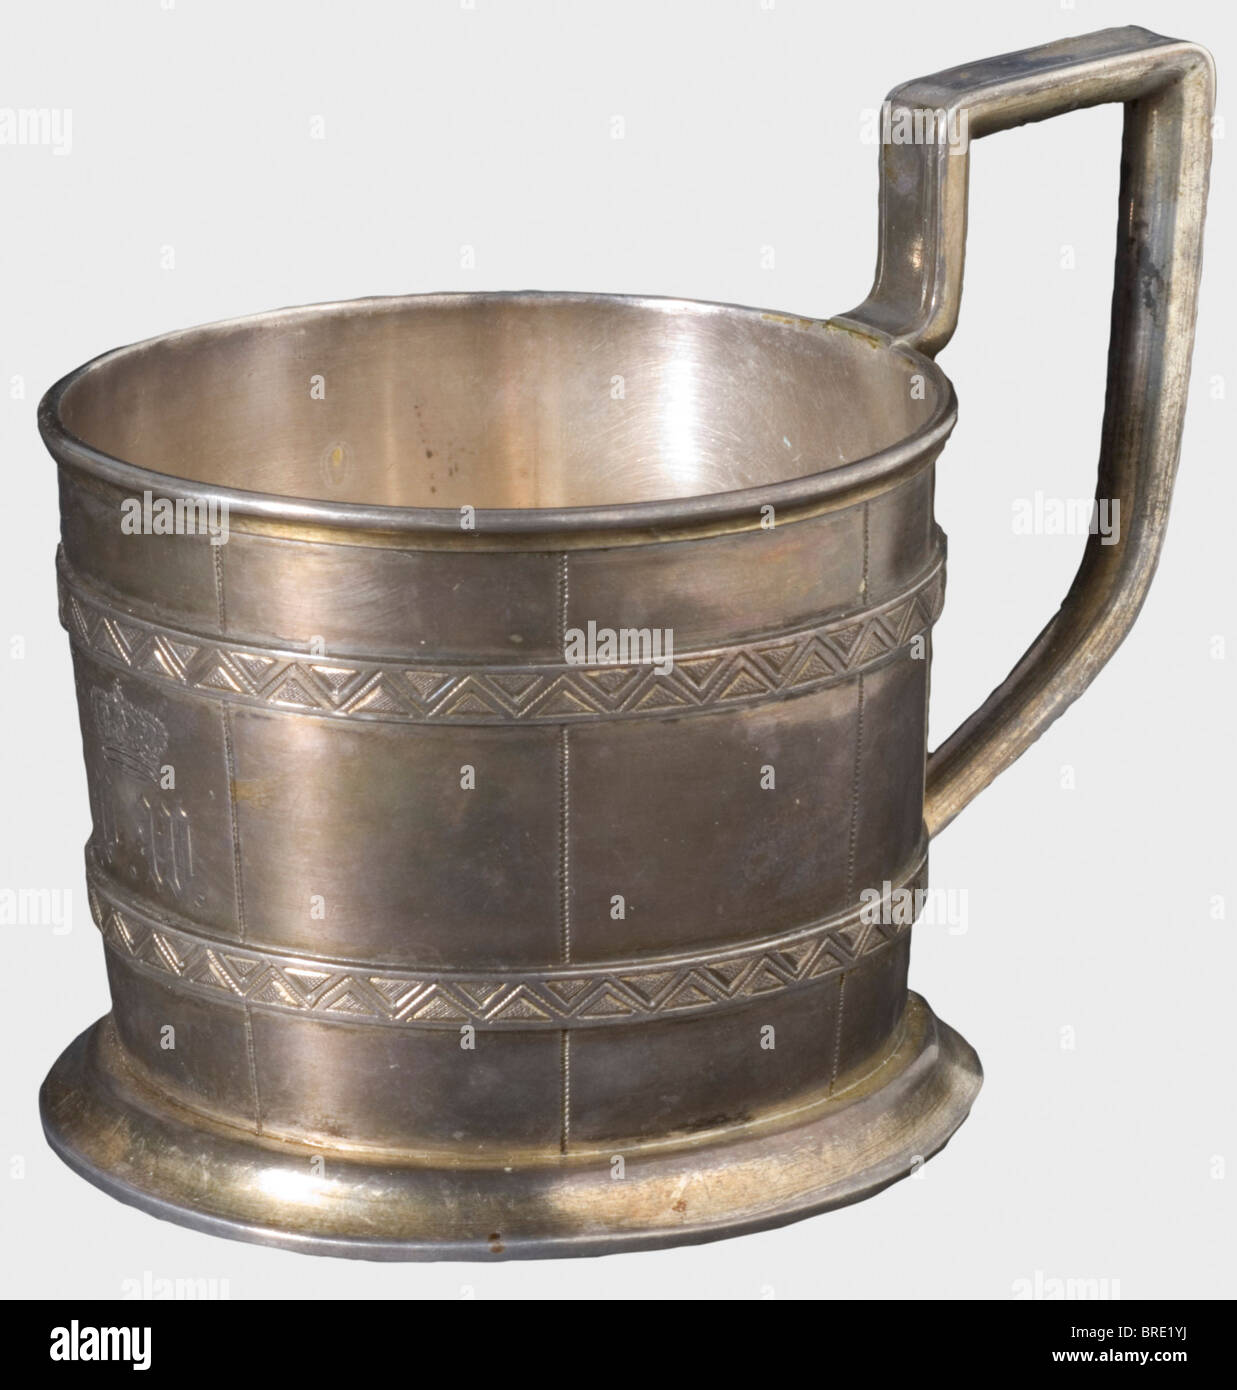 A silver holder for a tea glass, St. Petersburg, 1874 Silver, made in the shape of a cask. The master's mark 'AL', '84' hallmark, and the St. Petersburg inspection mark with the year '1874' are on the bottom. Height 8.5 cm. Weight 141 g. The monogram 'FW' beneath a crown is displayed on the front, so presumably it was a gift to/from Duke Friedrich Wilhelm von Württemberg (1802 - 1881). Provenance: Grand Duchess Olga Nikolaevna Romanova (1822 - 1892). historic, historical, 19th century, object, objects, stills, clipping, clippings, cut out, cut-out, cut-outs, Stock Photo